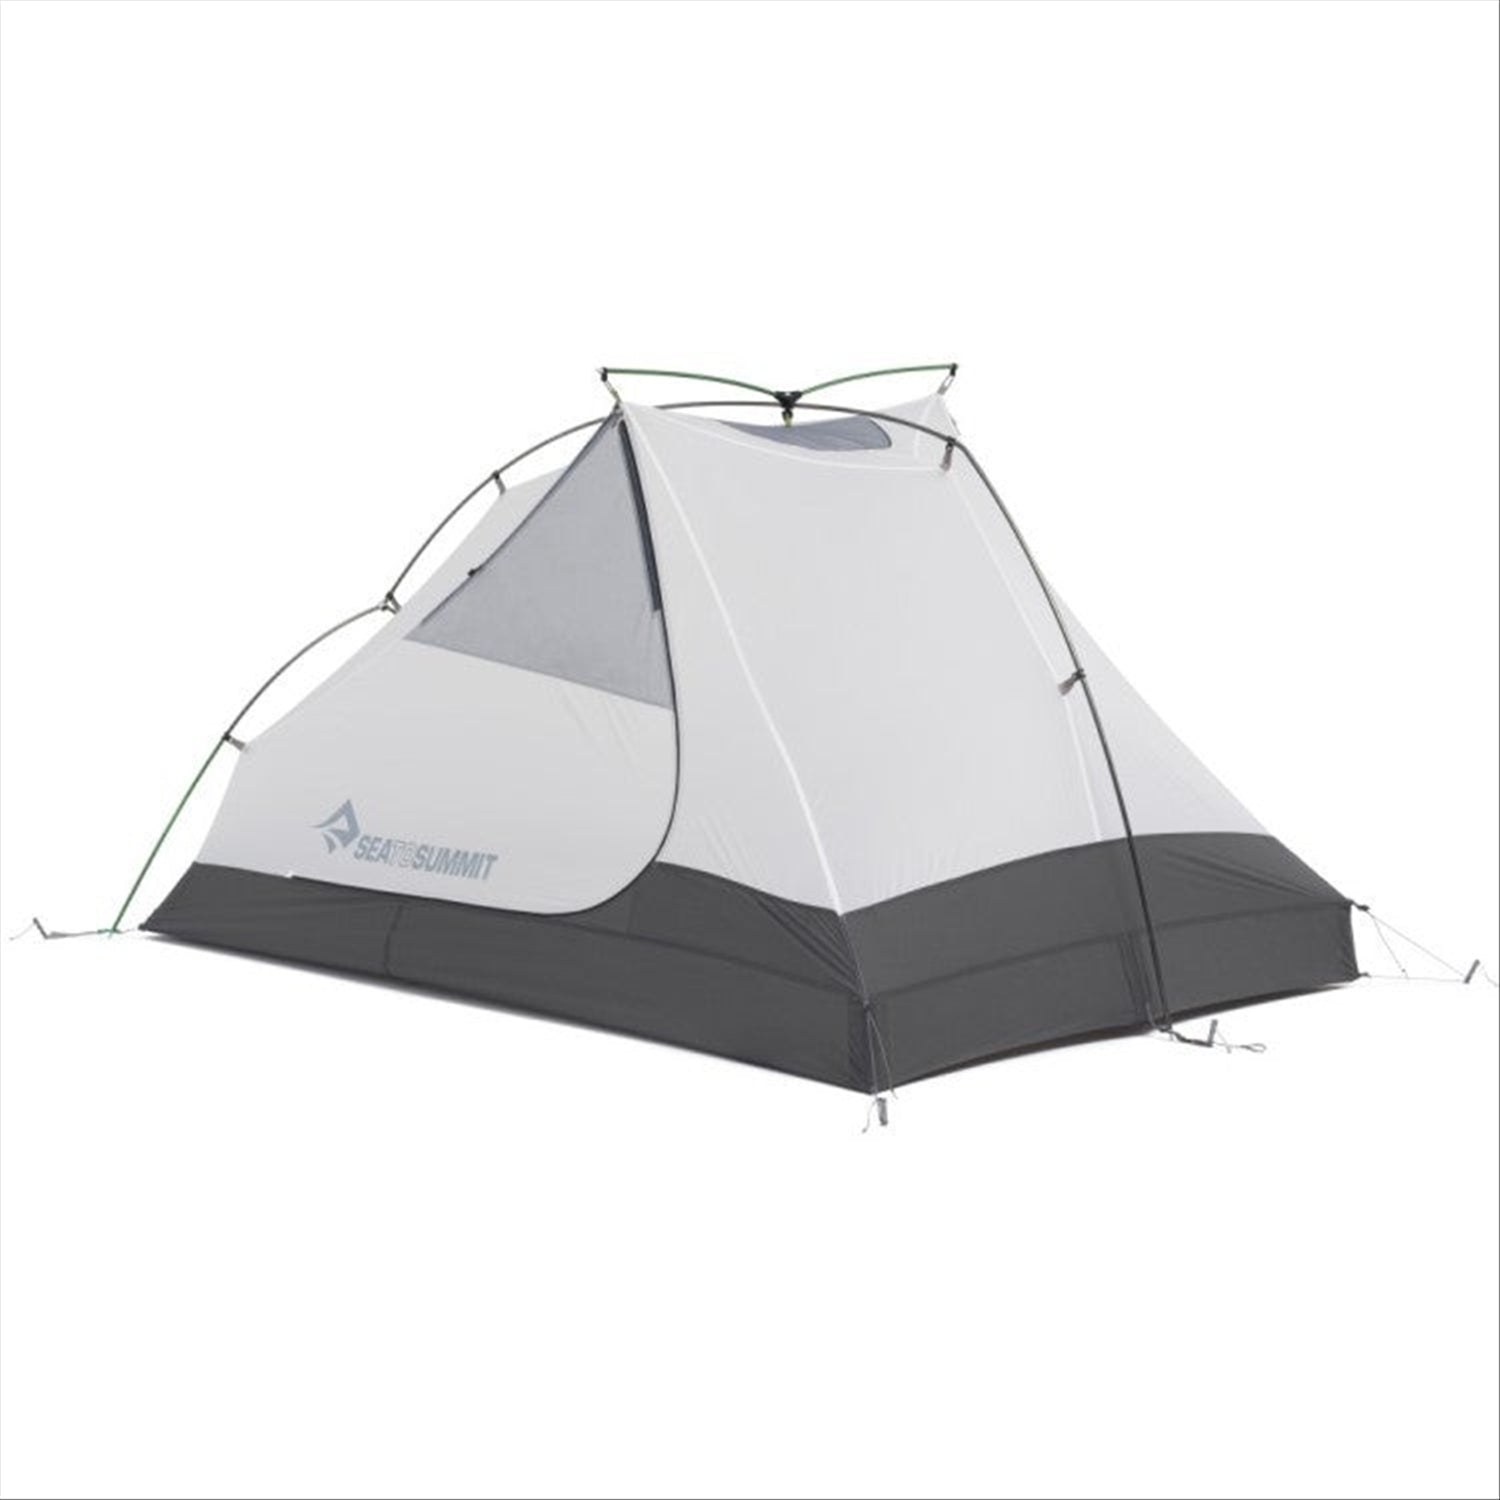 Sea to Summit Sea To Summit Alto TR2 PLUS Ultralite 2 person Backpacking Tent 1.48kg